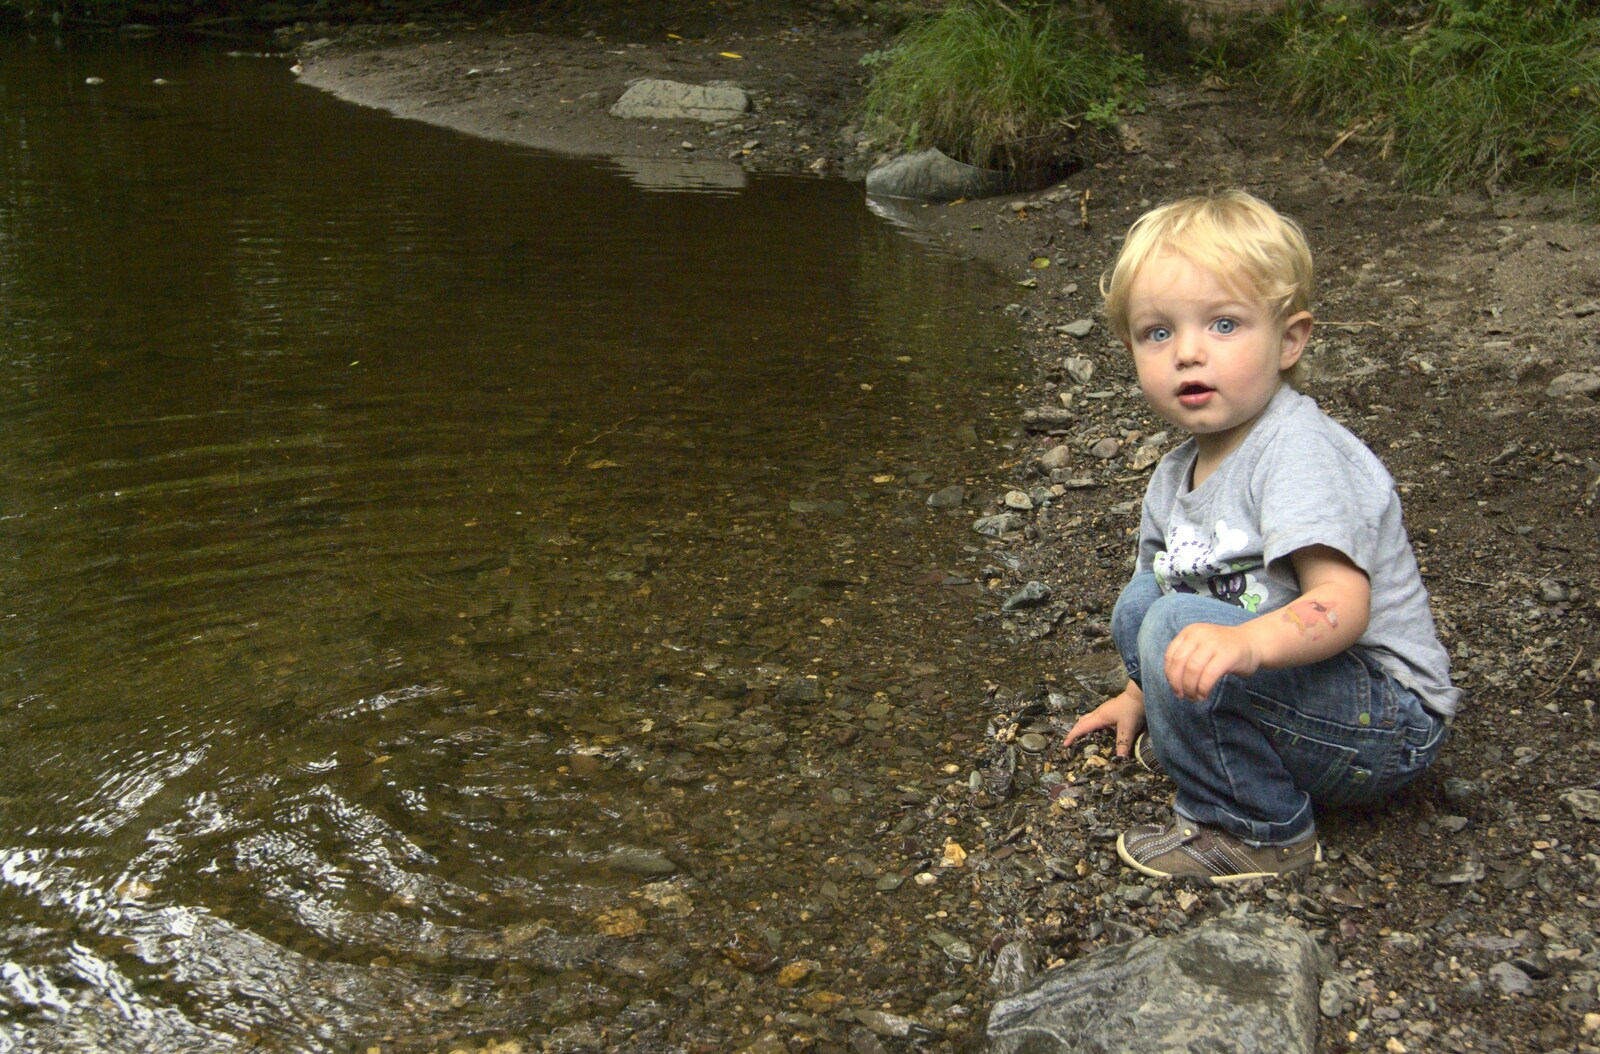 A Walk in Devil's Glen, County Wicklow, Ireland - 31st July 2010: The Boy pokes about by the river